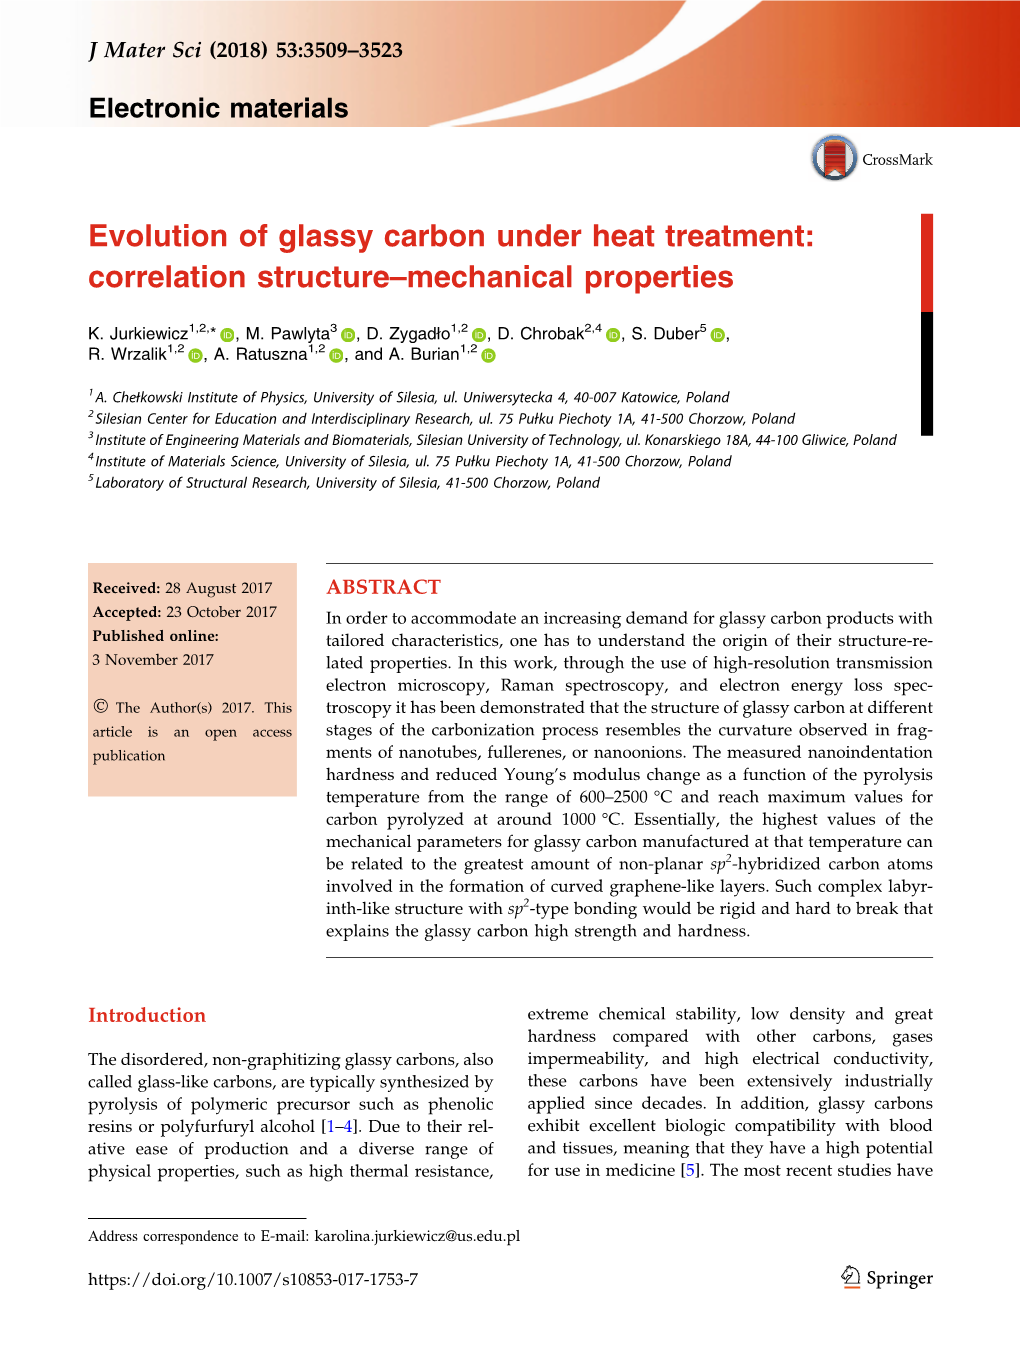 Evolution of Glassy Carbon Under Heat Treatment: Correlation Structure–Mechanical Properties